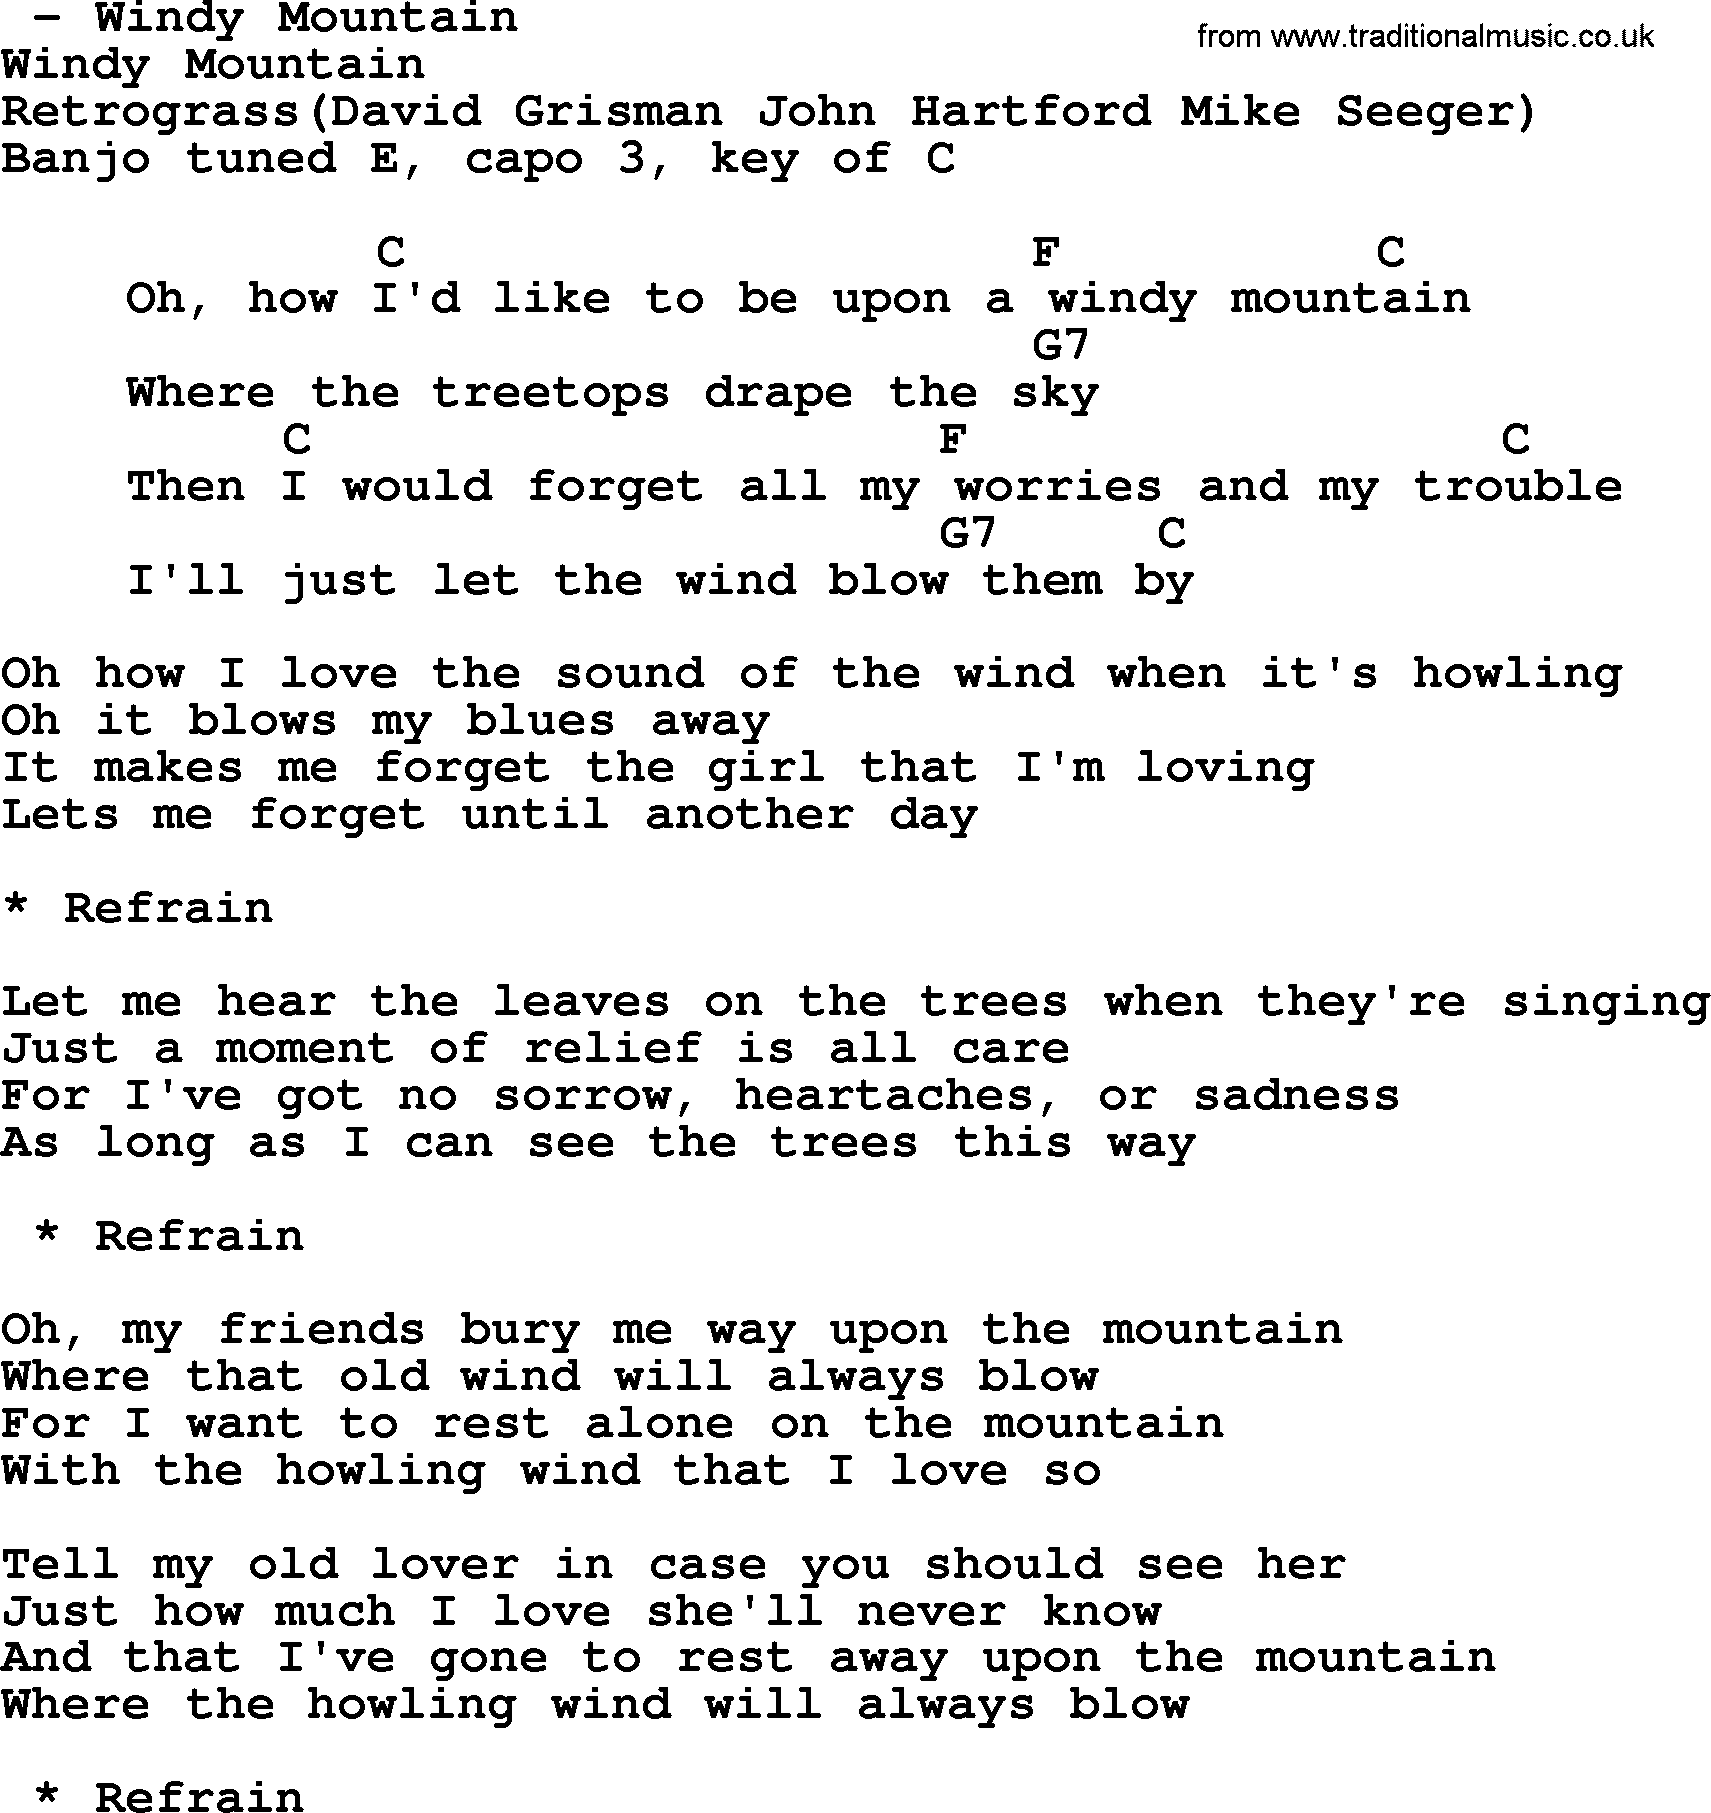 Bluegrass song: Windy Mountain, lyrics and chords